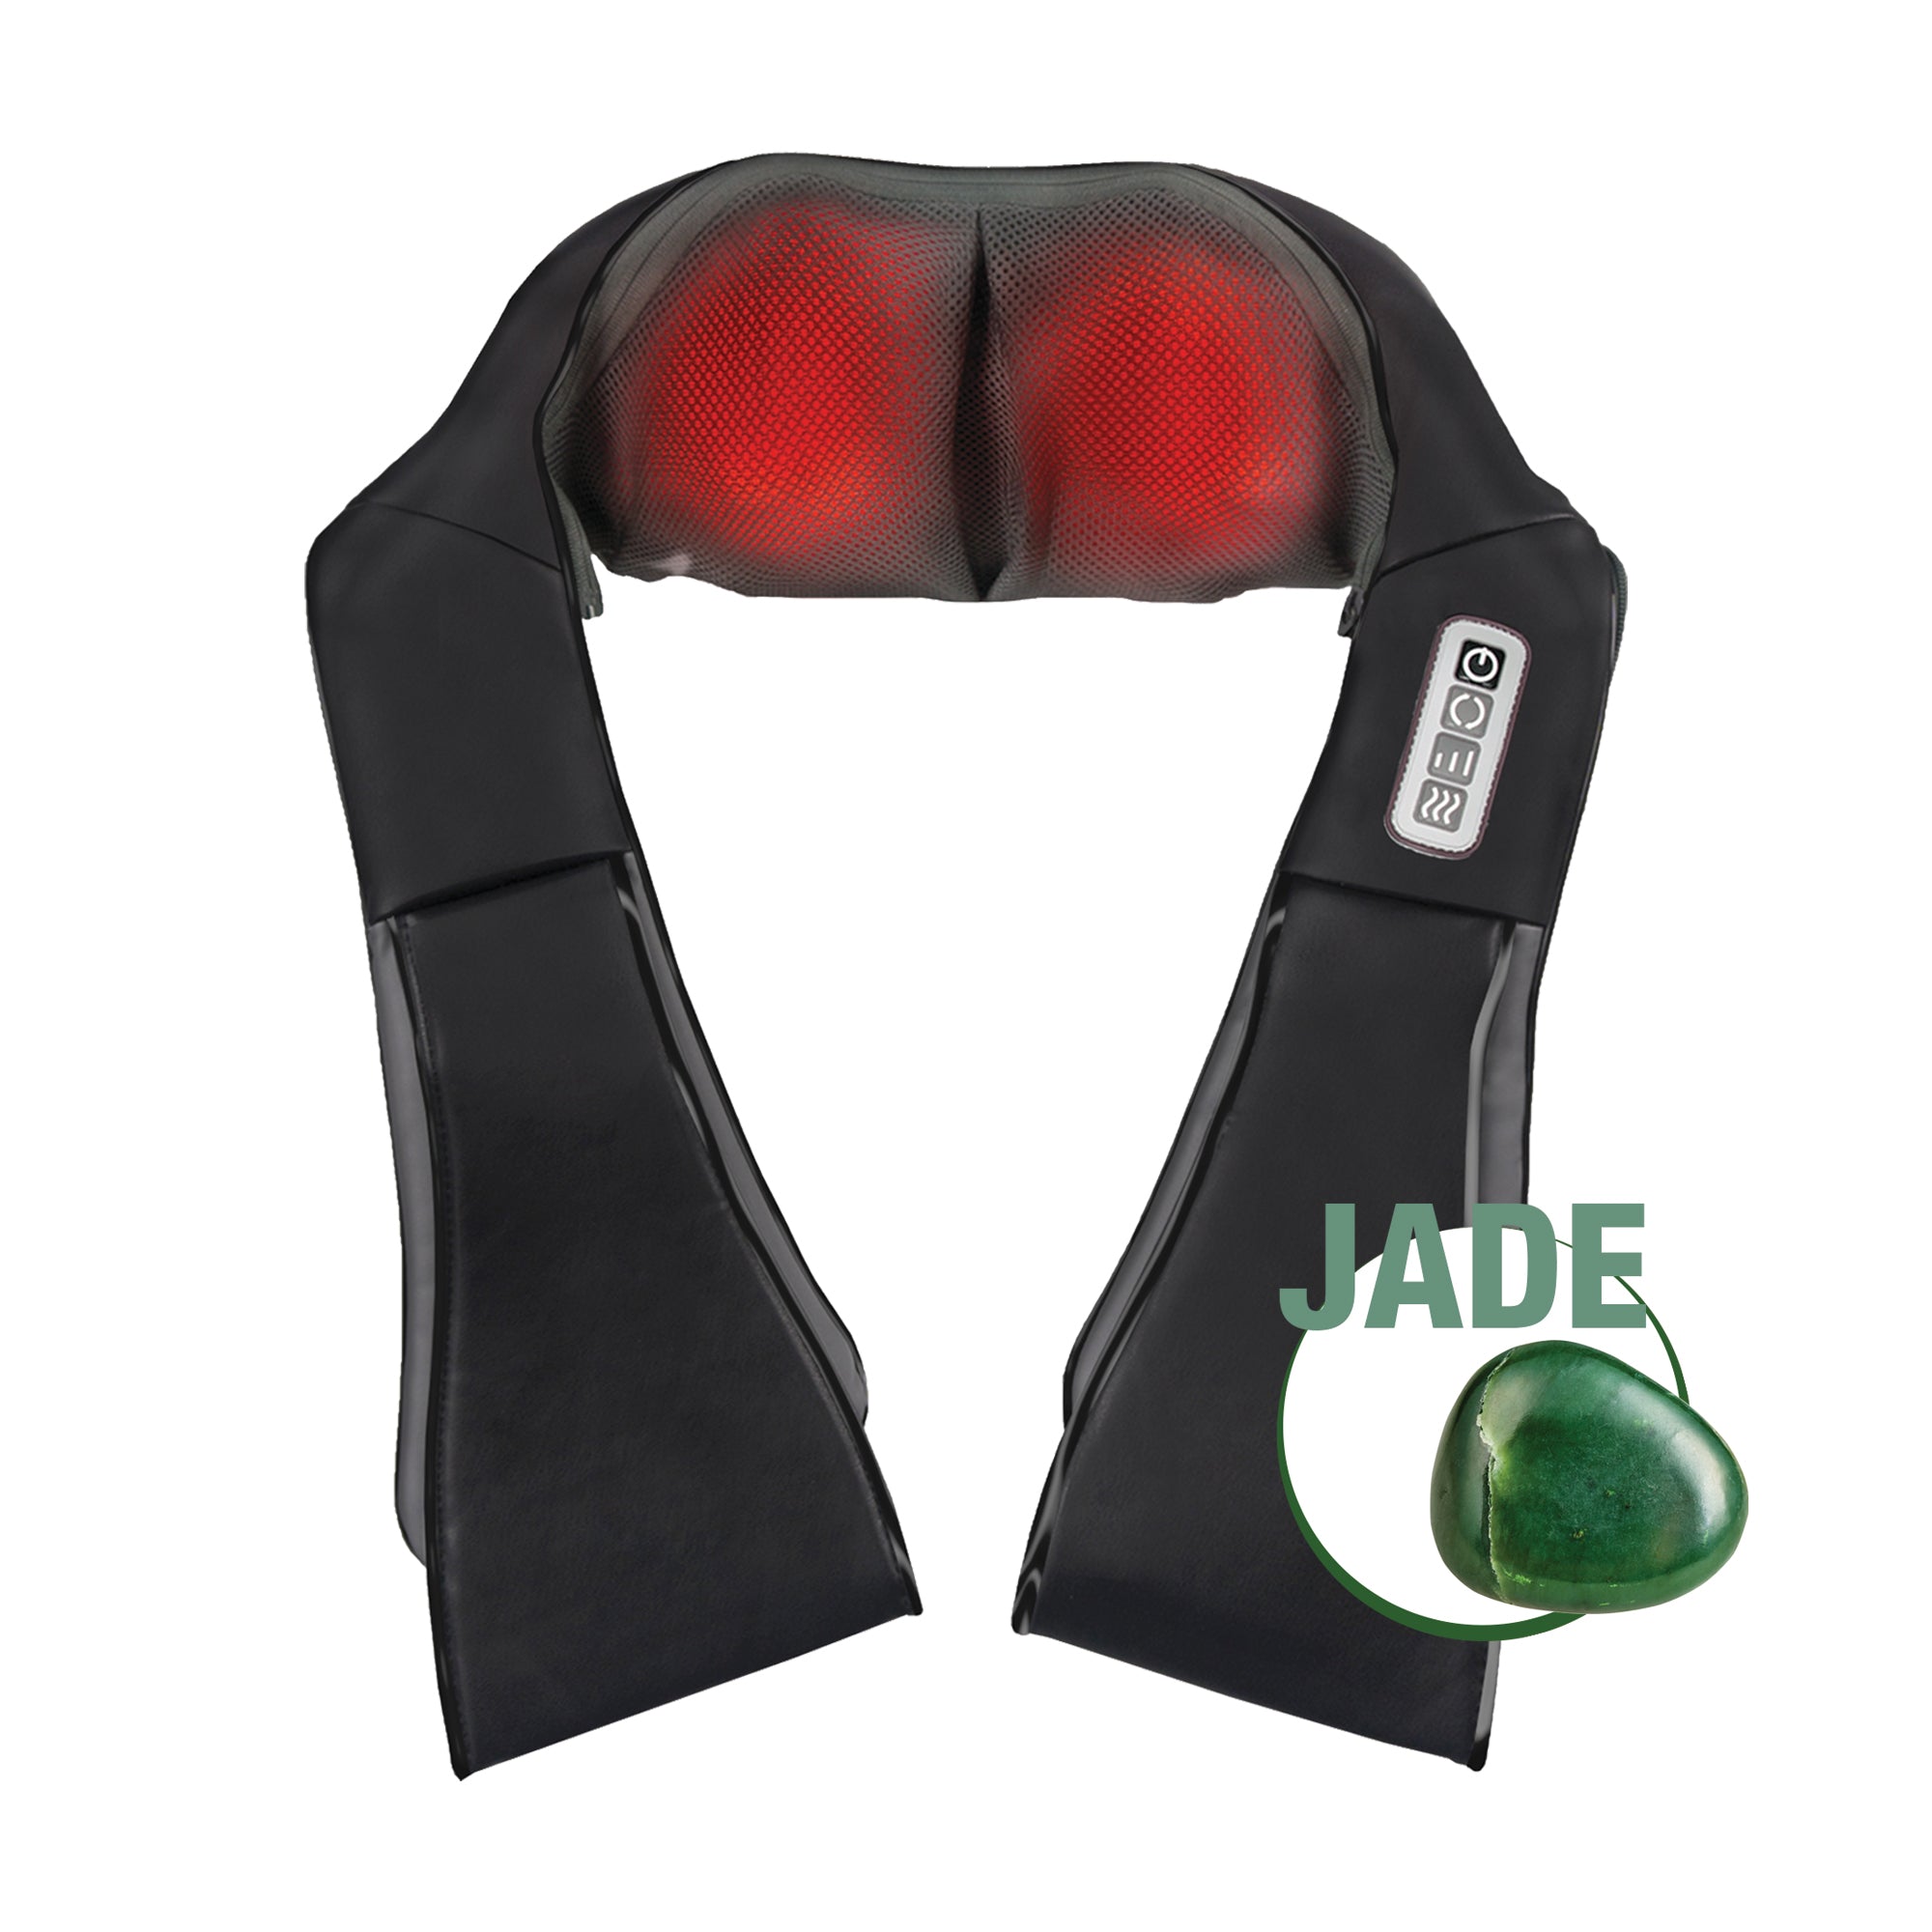 Heated massager with two arm loops